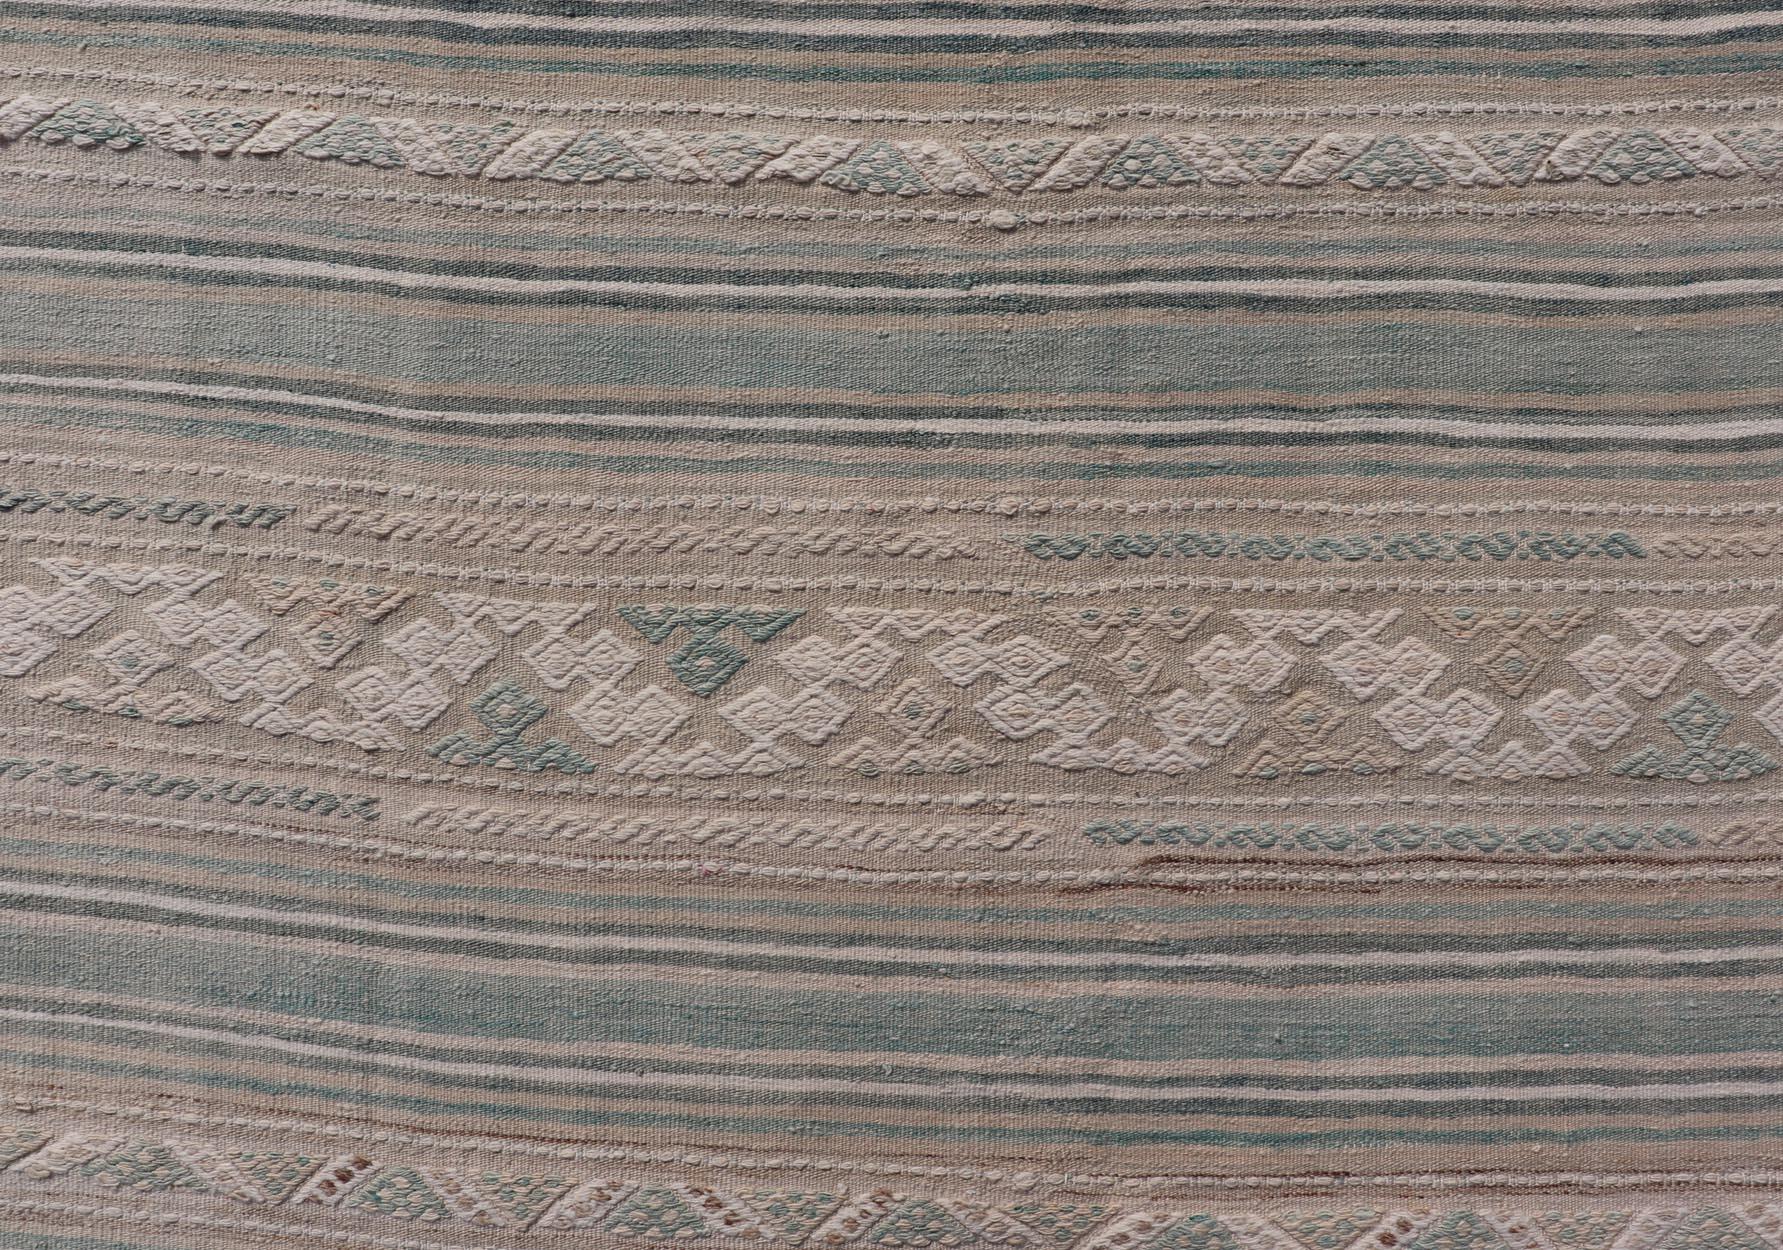 Wool Turkish Gallery Flat-Weave Kilim in Muted Colors with Stripes and Embroideries For Sale